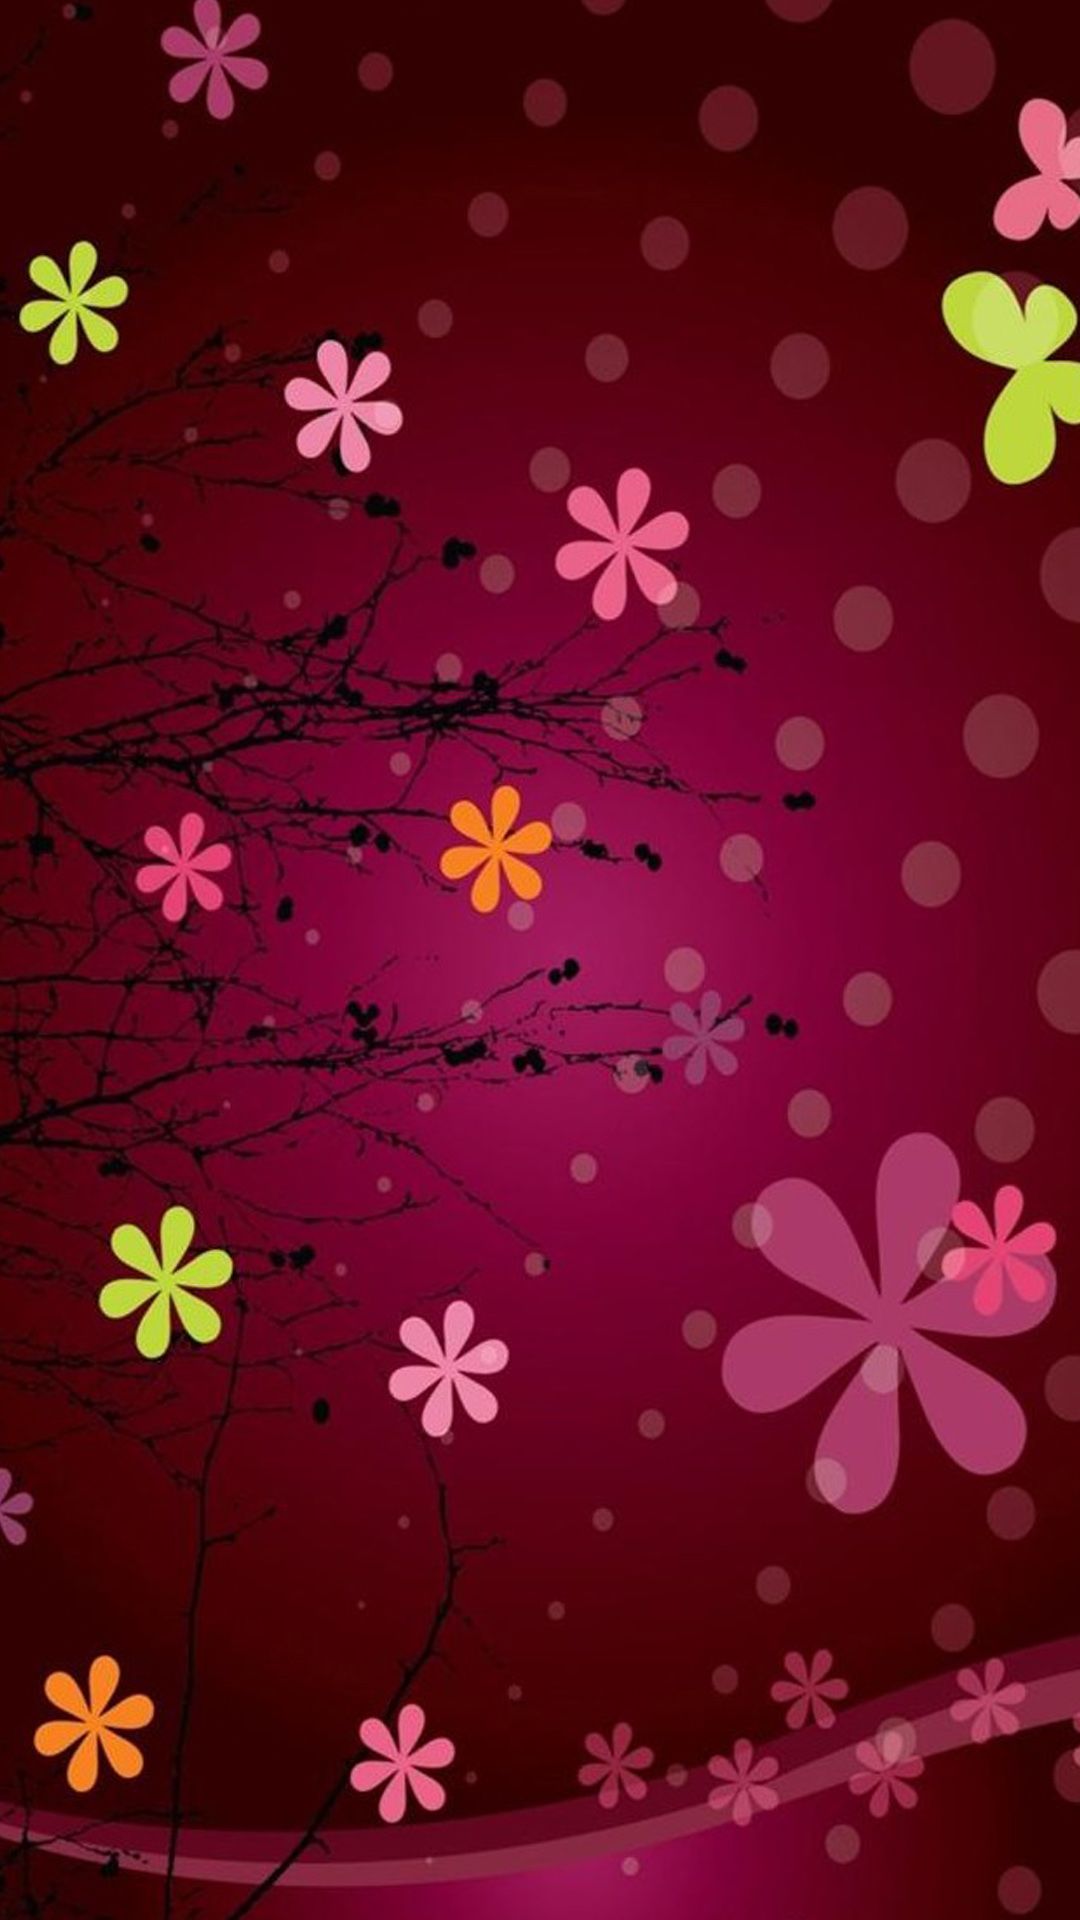 latest new wallpaper for mobile,pink,pattern,red,purple,magenta